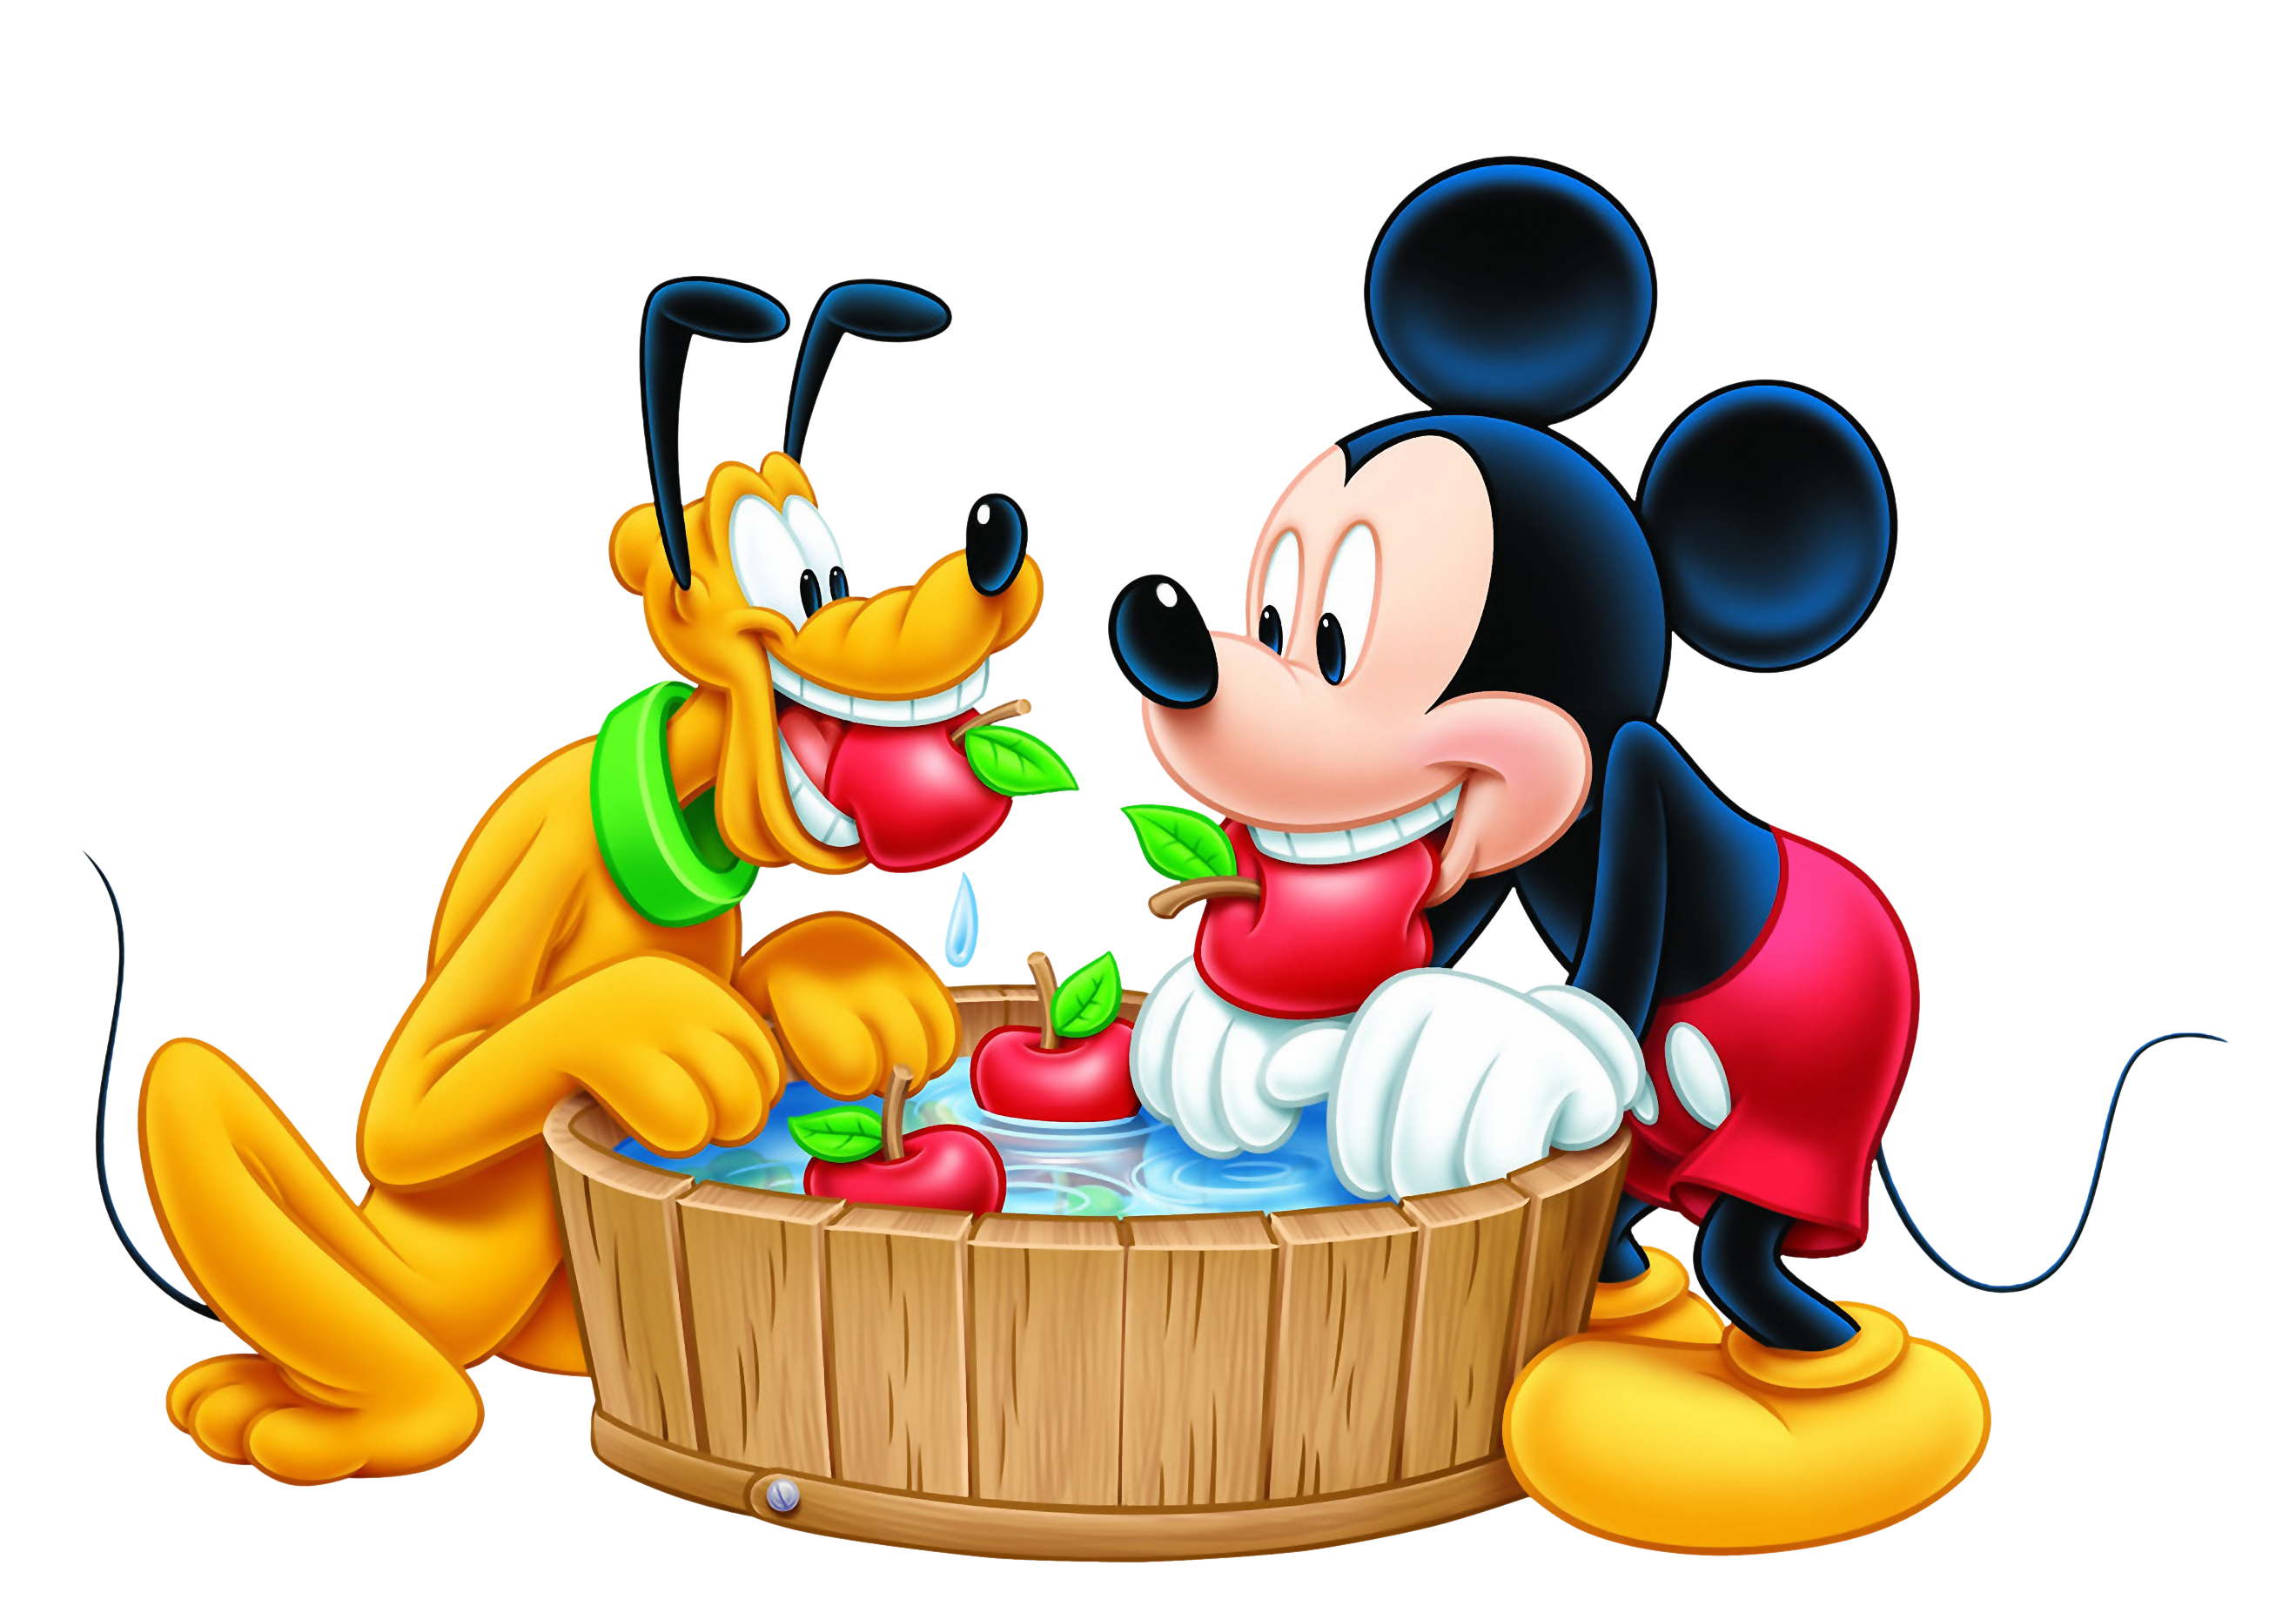 Download Mickey Mouse & Friends PNG Image for Free